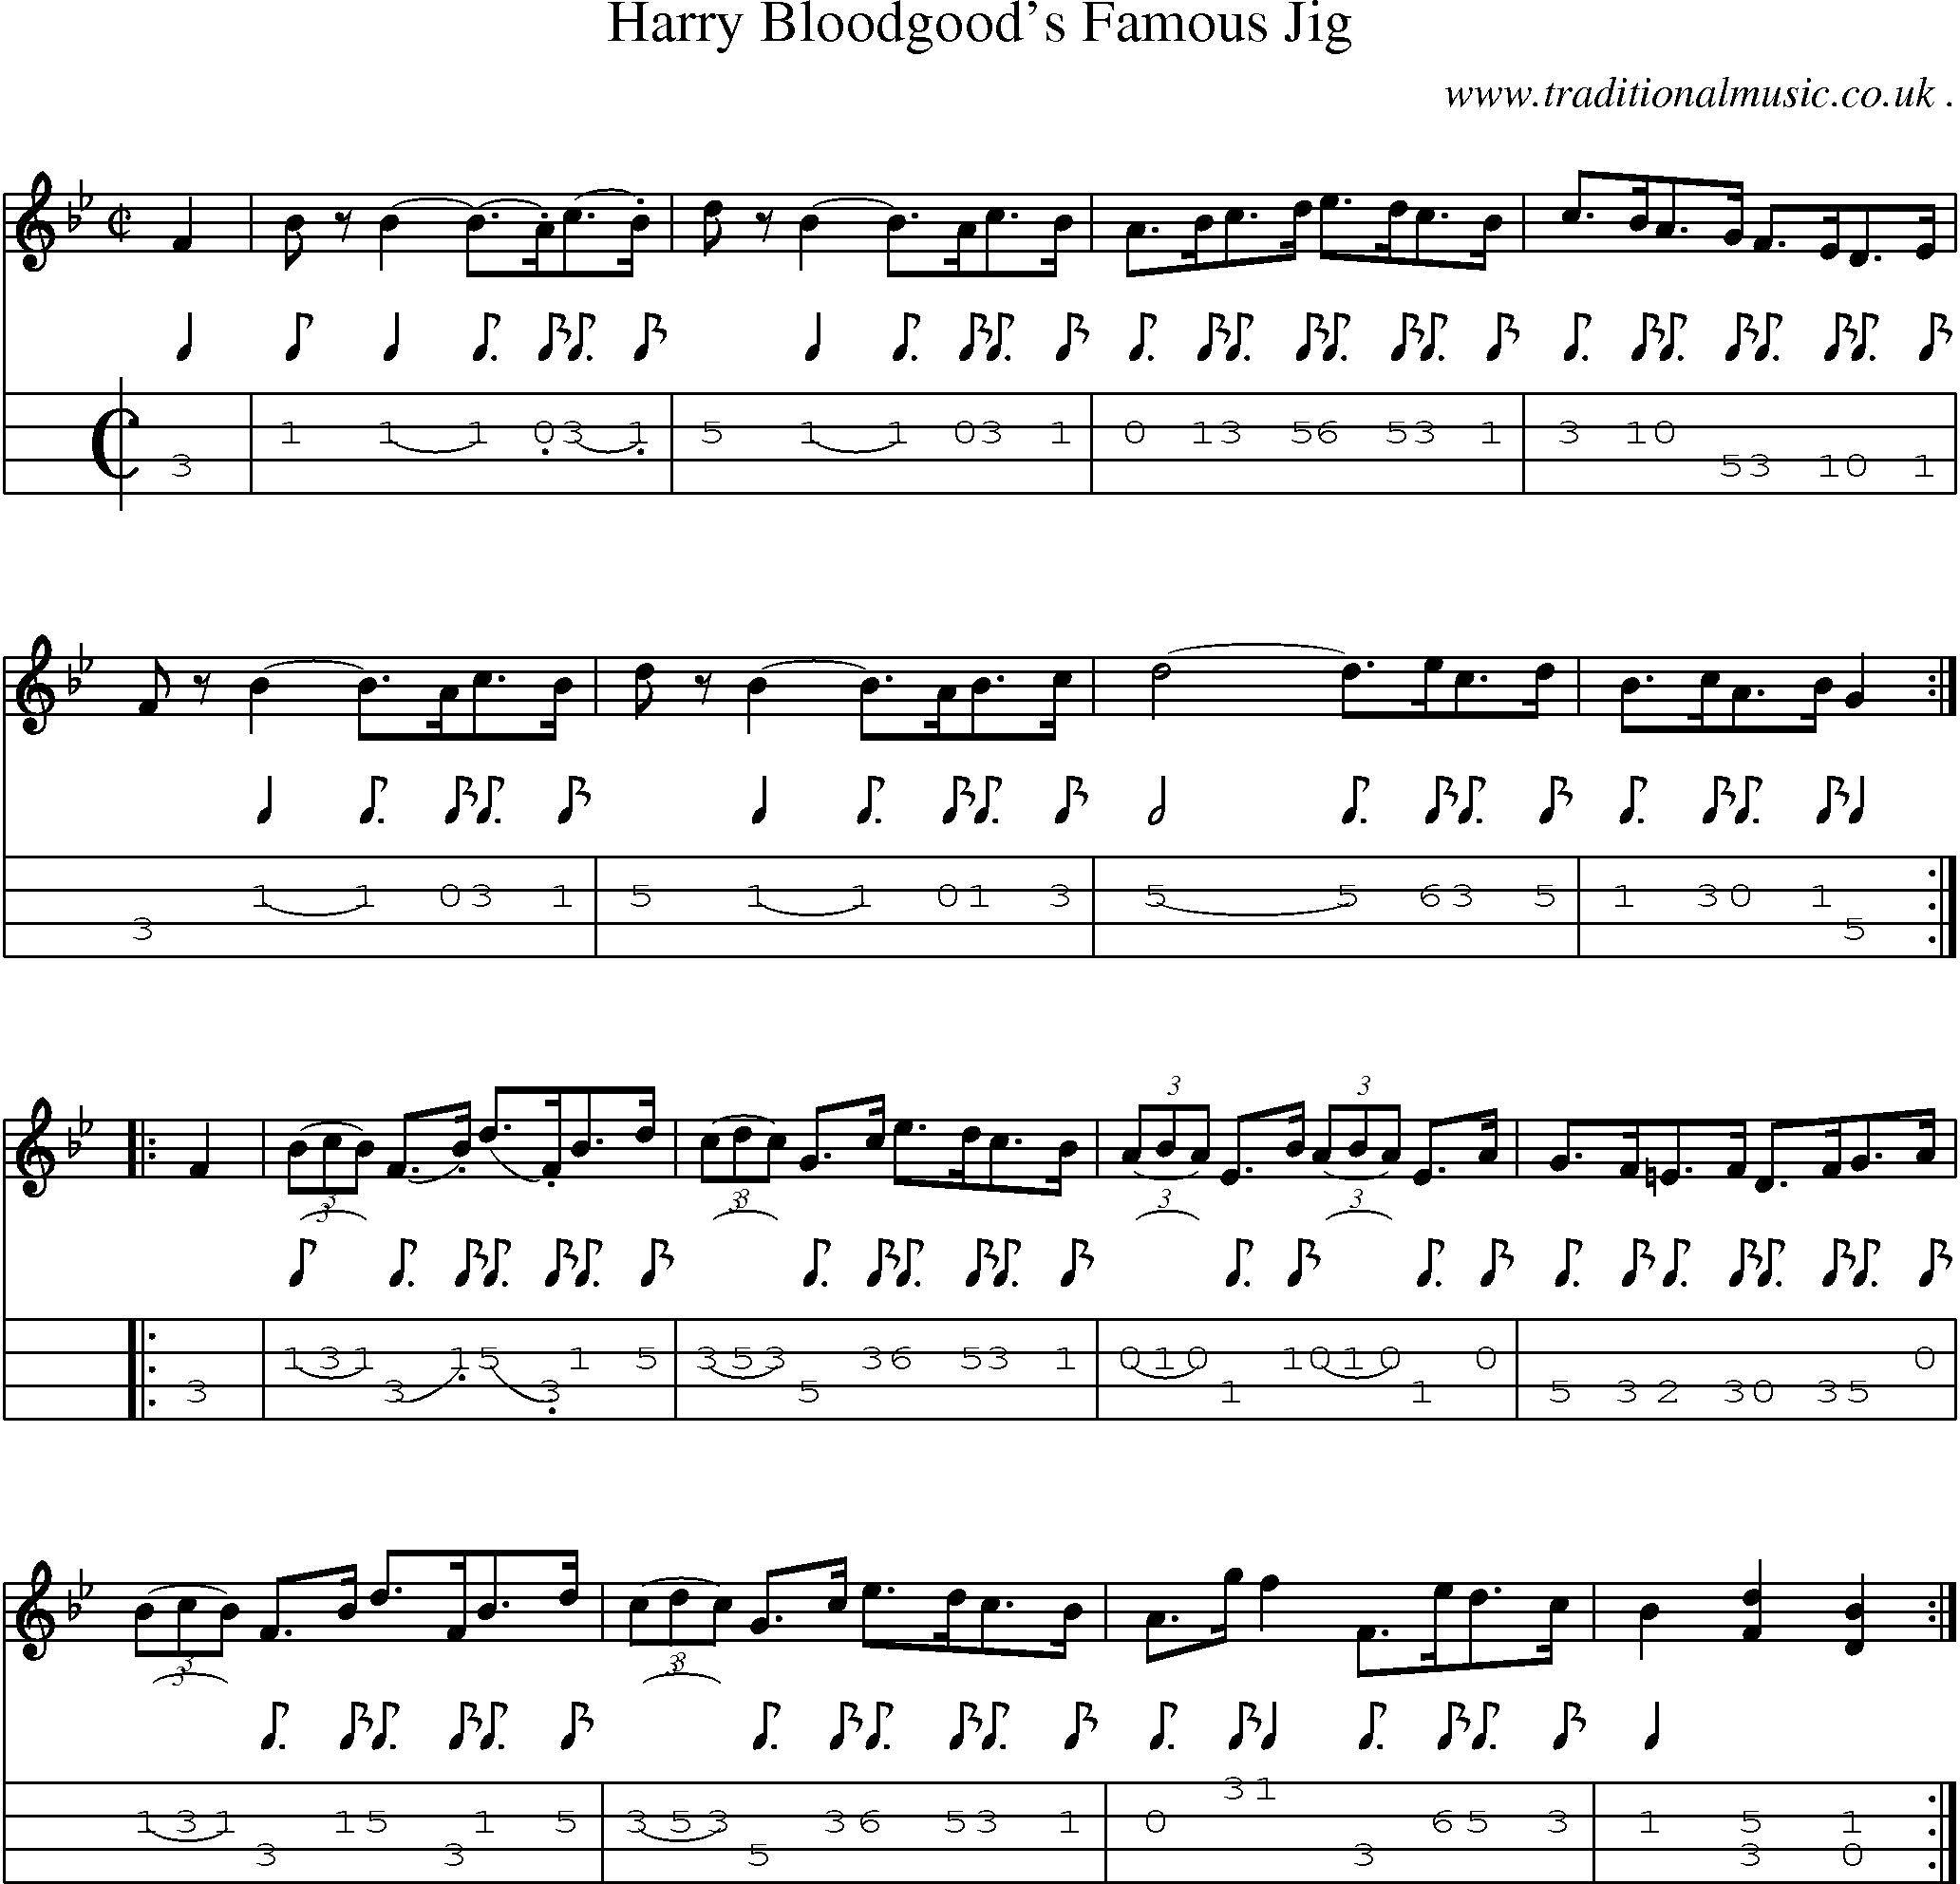 Sheet-Music and Mandolin Tabs for Harry Bloodgoods Famous Jig